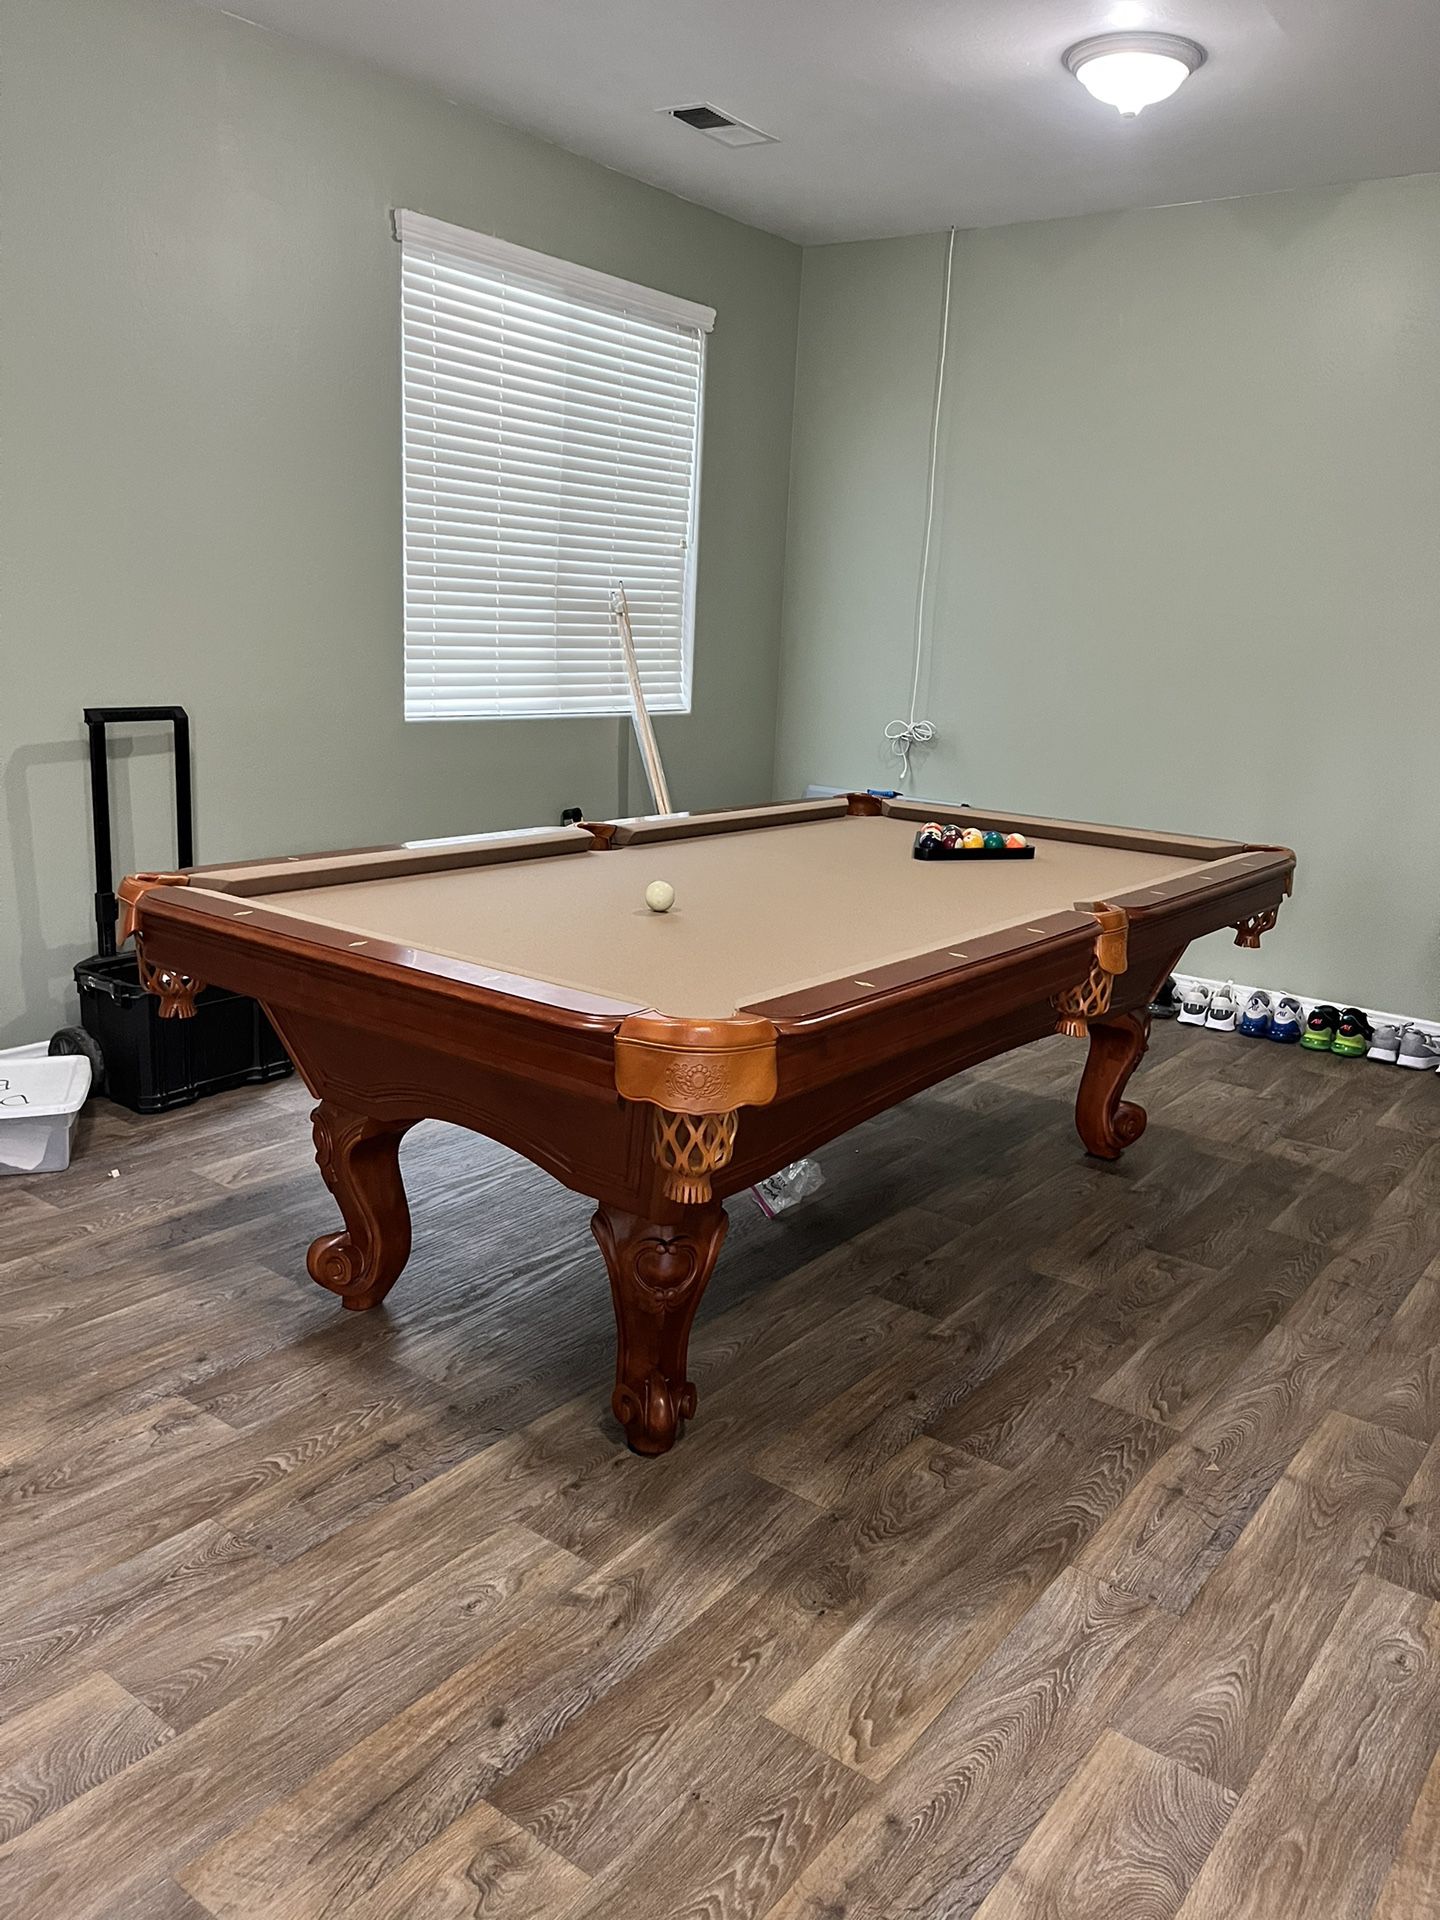 Pool Table 8ft ( Free Delivery & Set Up & New Color Felt Of Your Choice